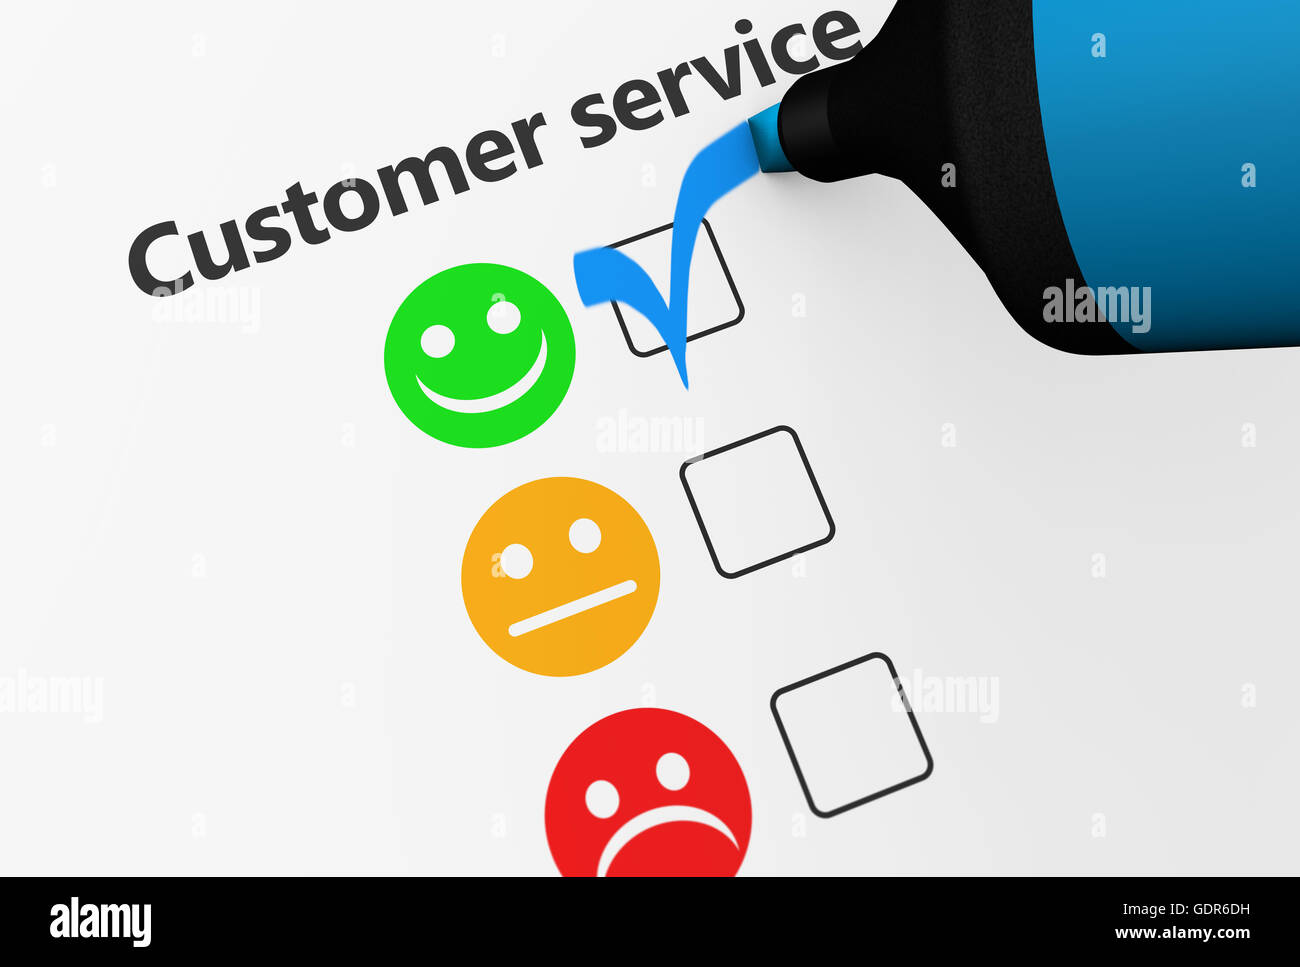 Customer service happy feedback rating checklist and business quality evaluation concept 3D illustration. Stock Photo